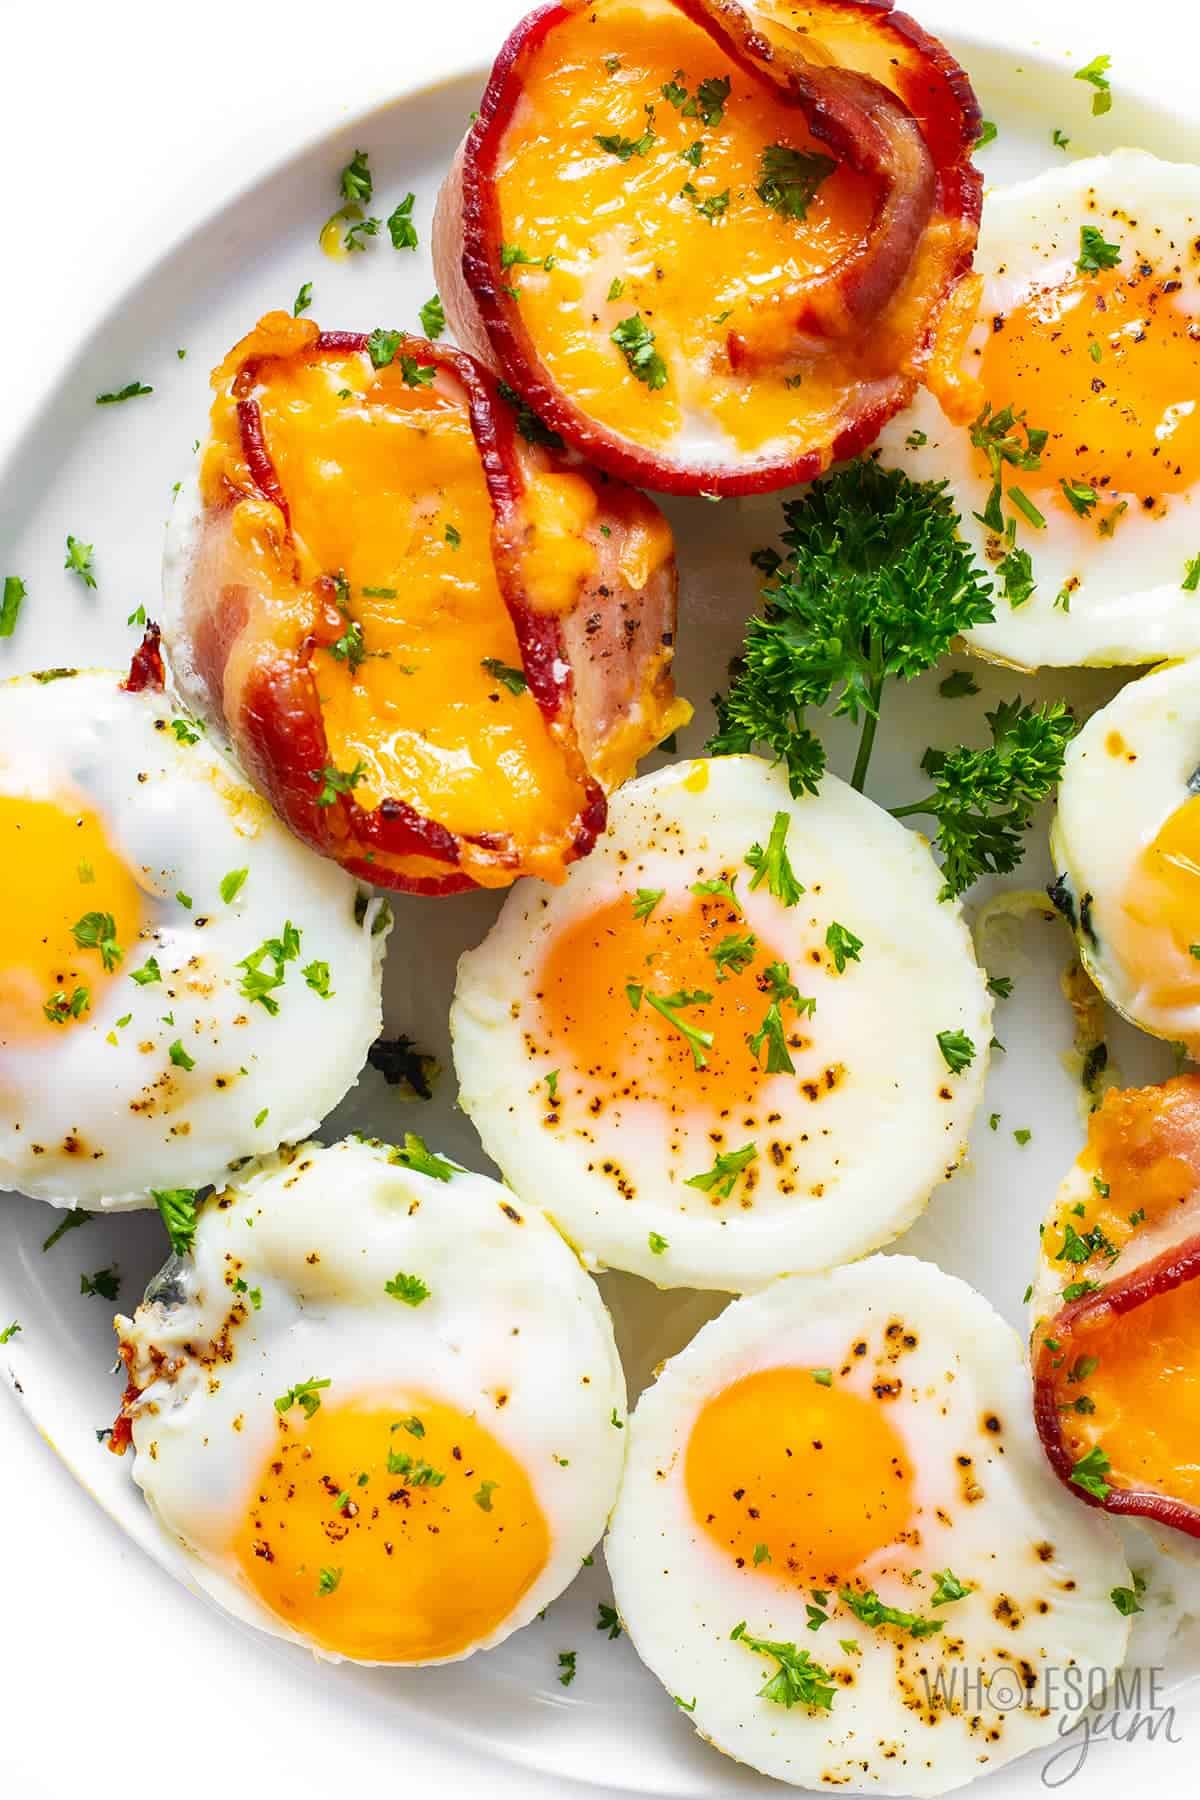 Baked eggs in a muffin tin, removed to a plate.